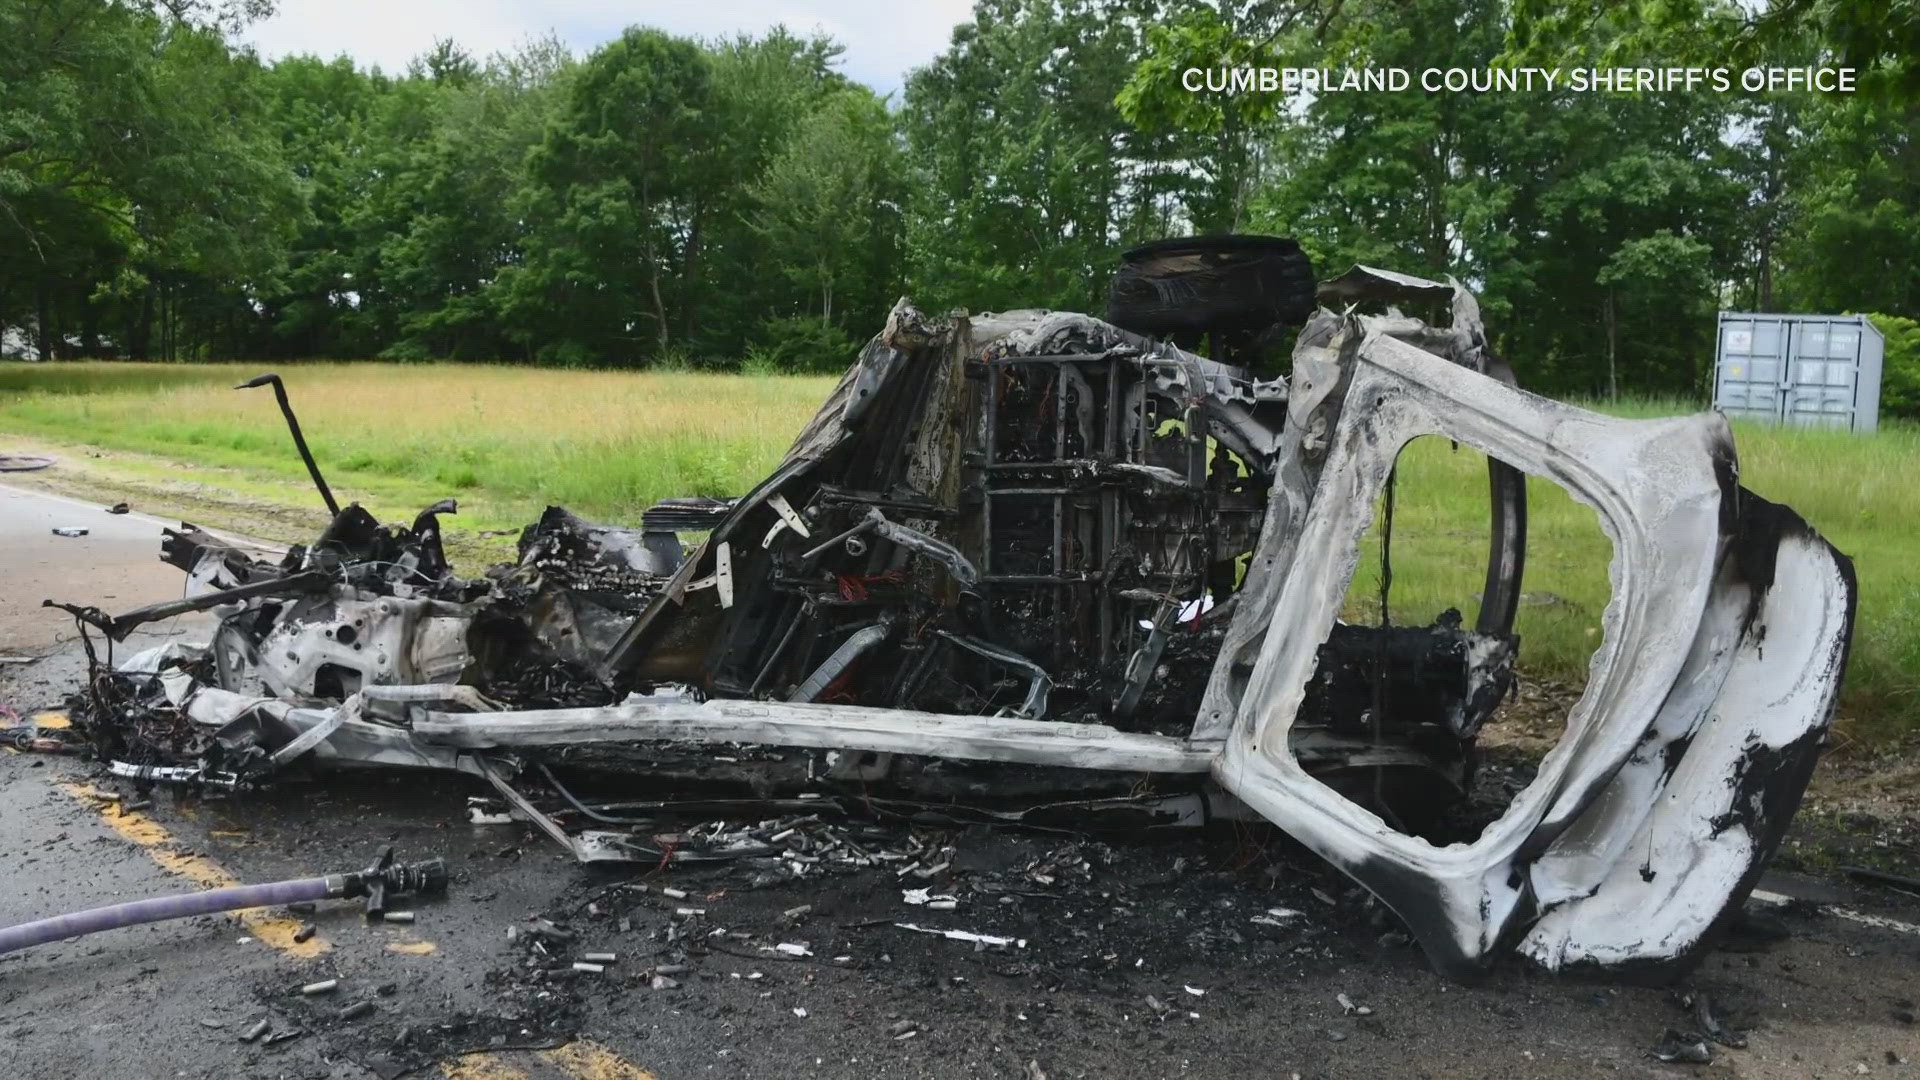 The crash presented significant hazards for first responders and area residents due to the vehicle involved and the complexity of the crash scene, officials said.